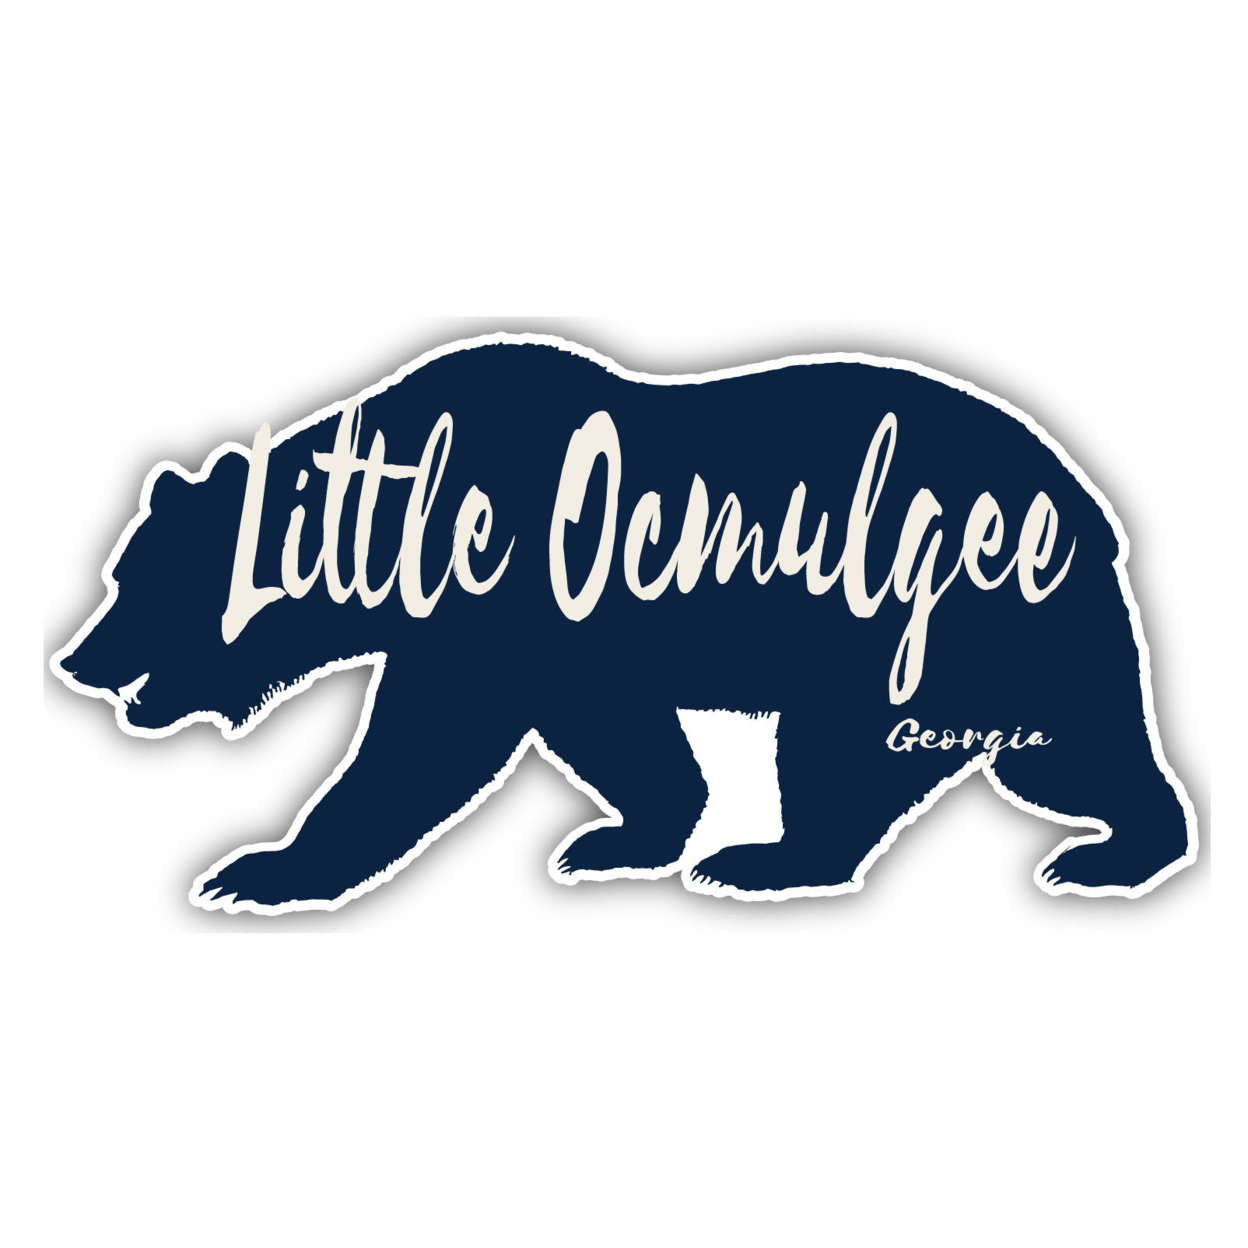 Little Ocmulgee Georgia Souvenir Decorative Stickers (Choose Theme And Size) - 4-Inch, Great Outdoors